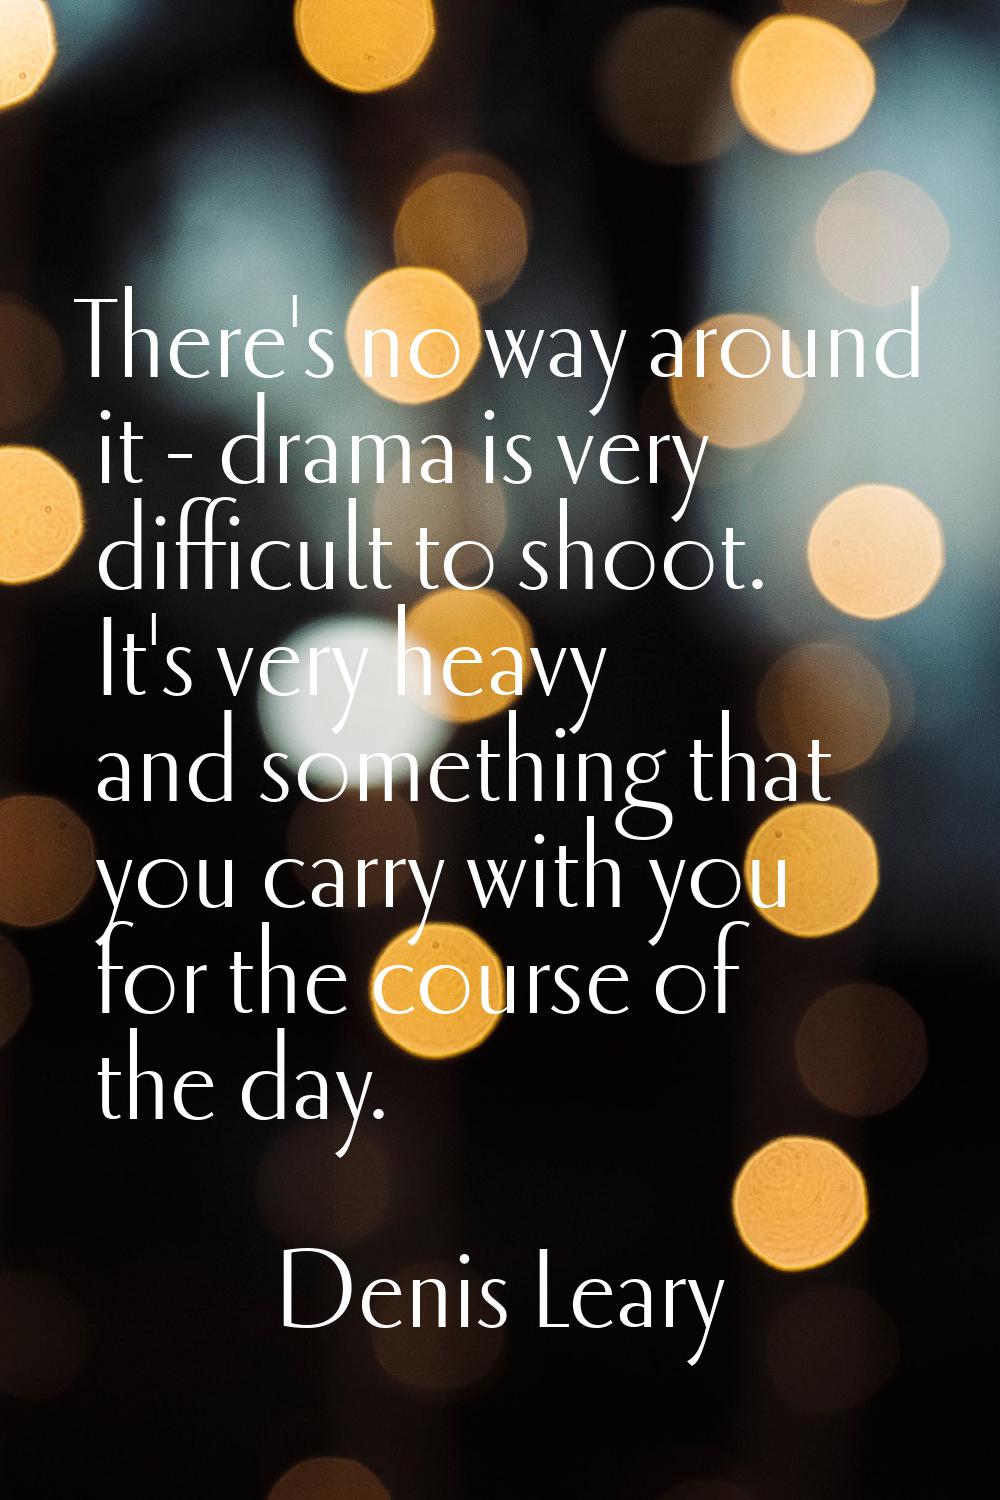 There's no way around it - drama is very difficult to shoot. It's very heavy and something that you